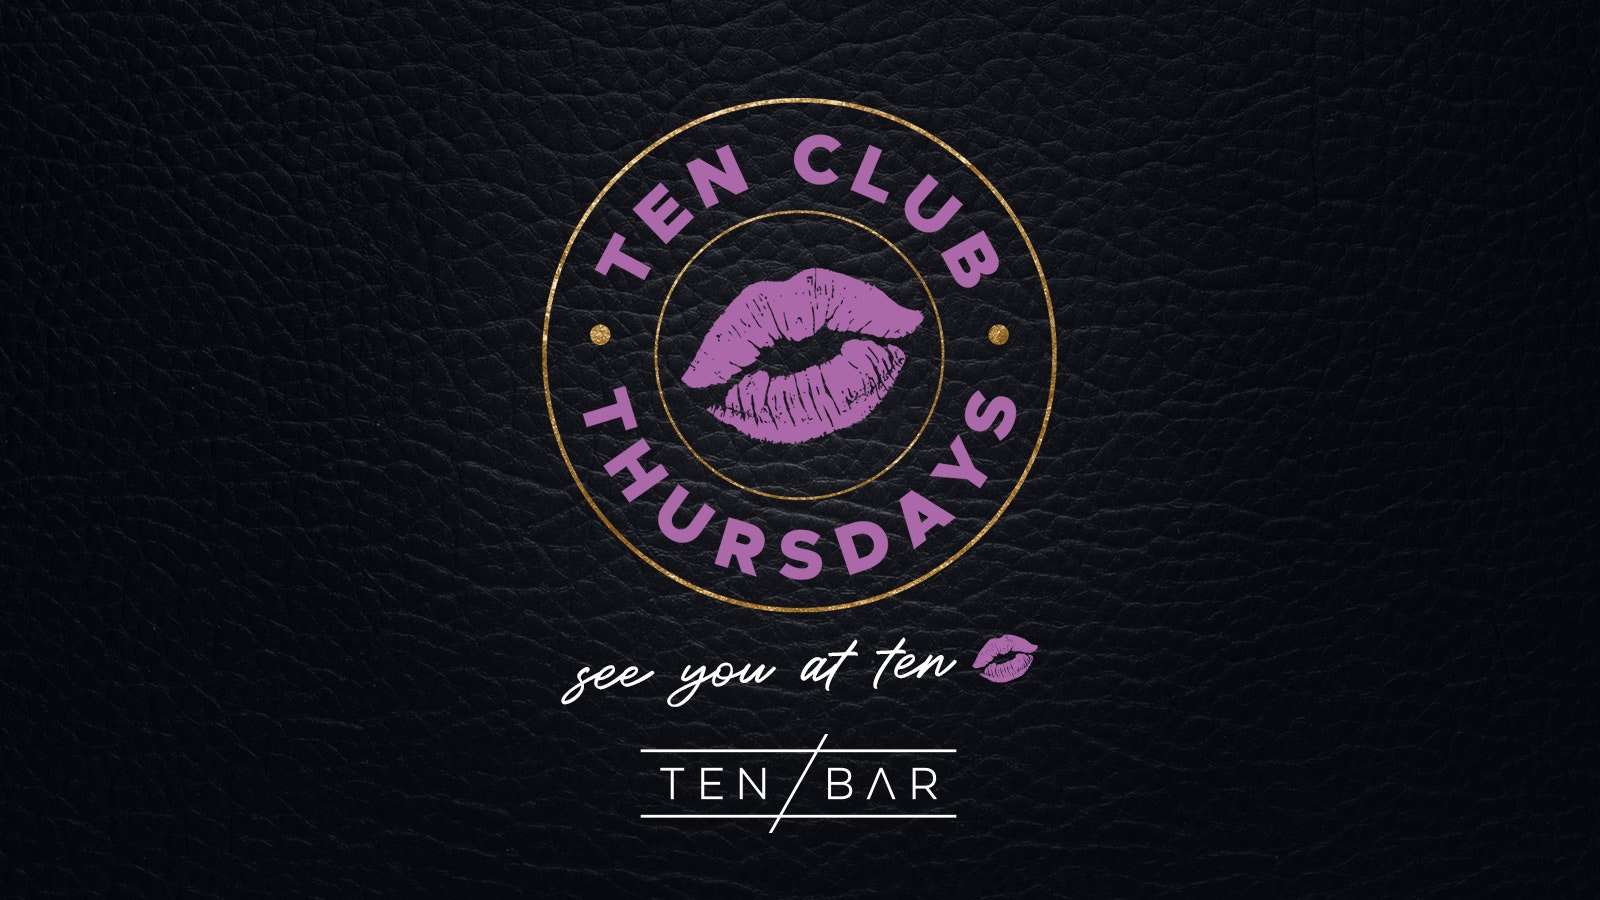 Ten Club Thursdays (Members Exclusive Drinks Deals Wristband) Free Entry all night long, Open from 9pm – 19th October